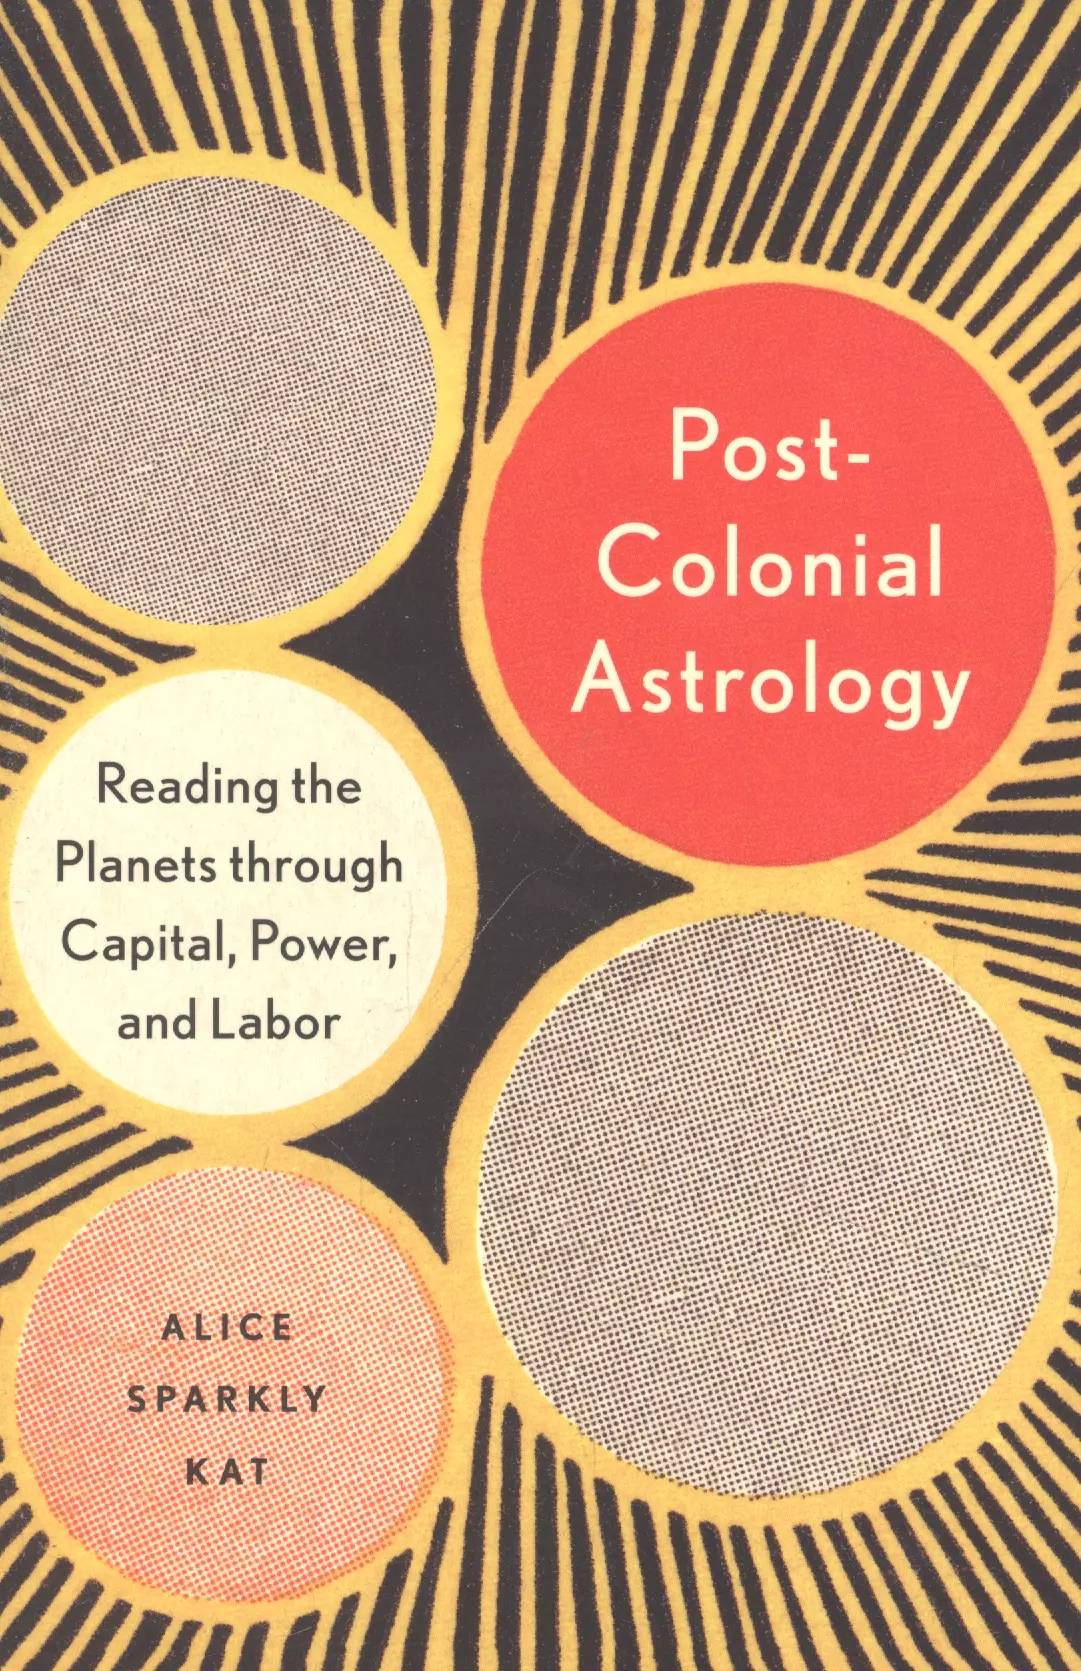 Sparks Allister - Postcolonial Astrology